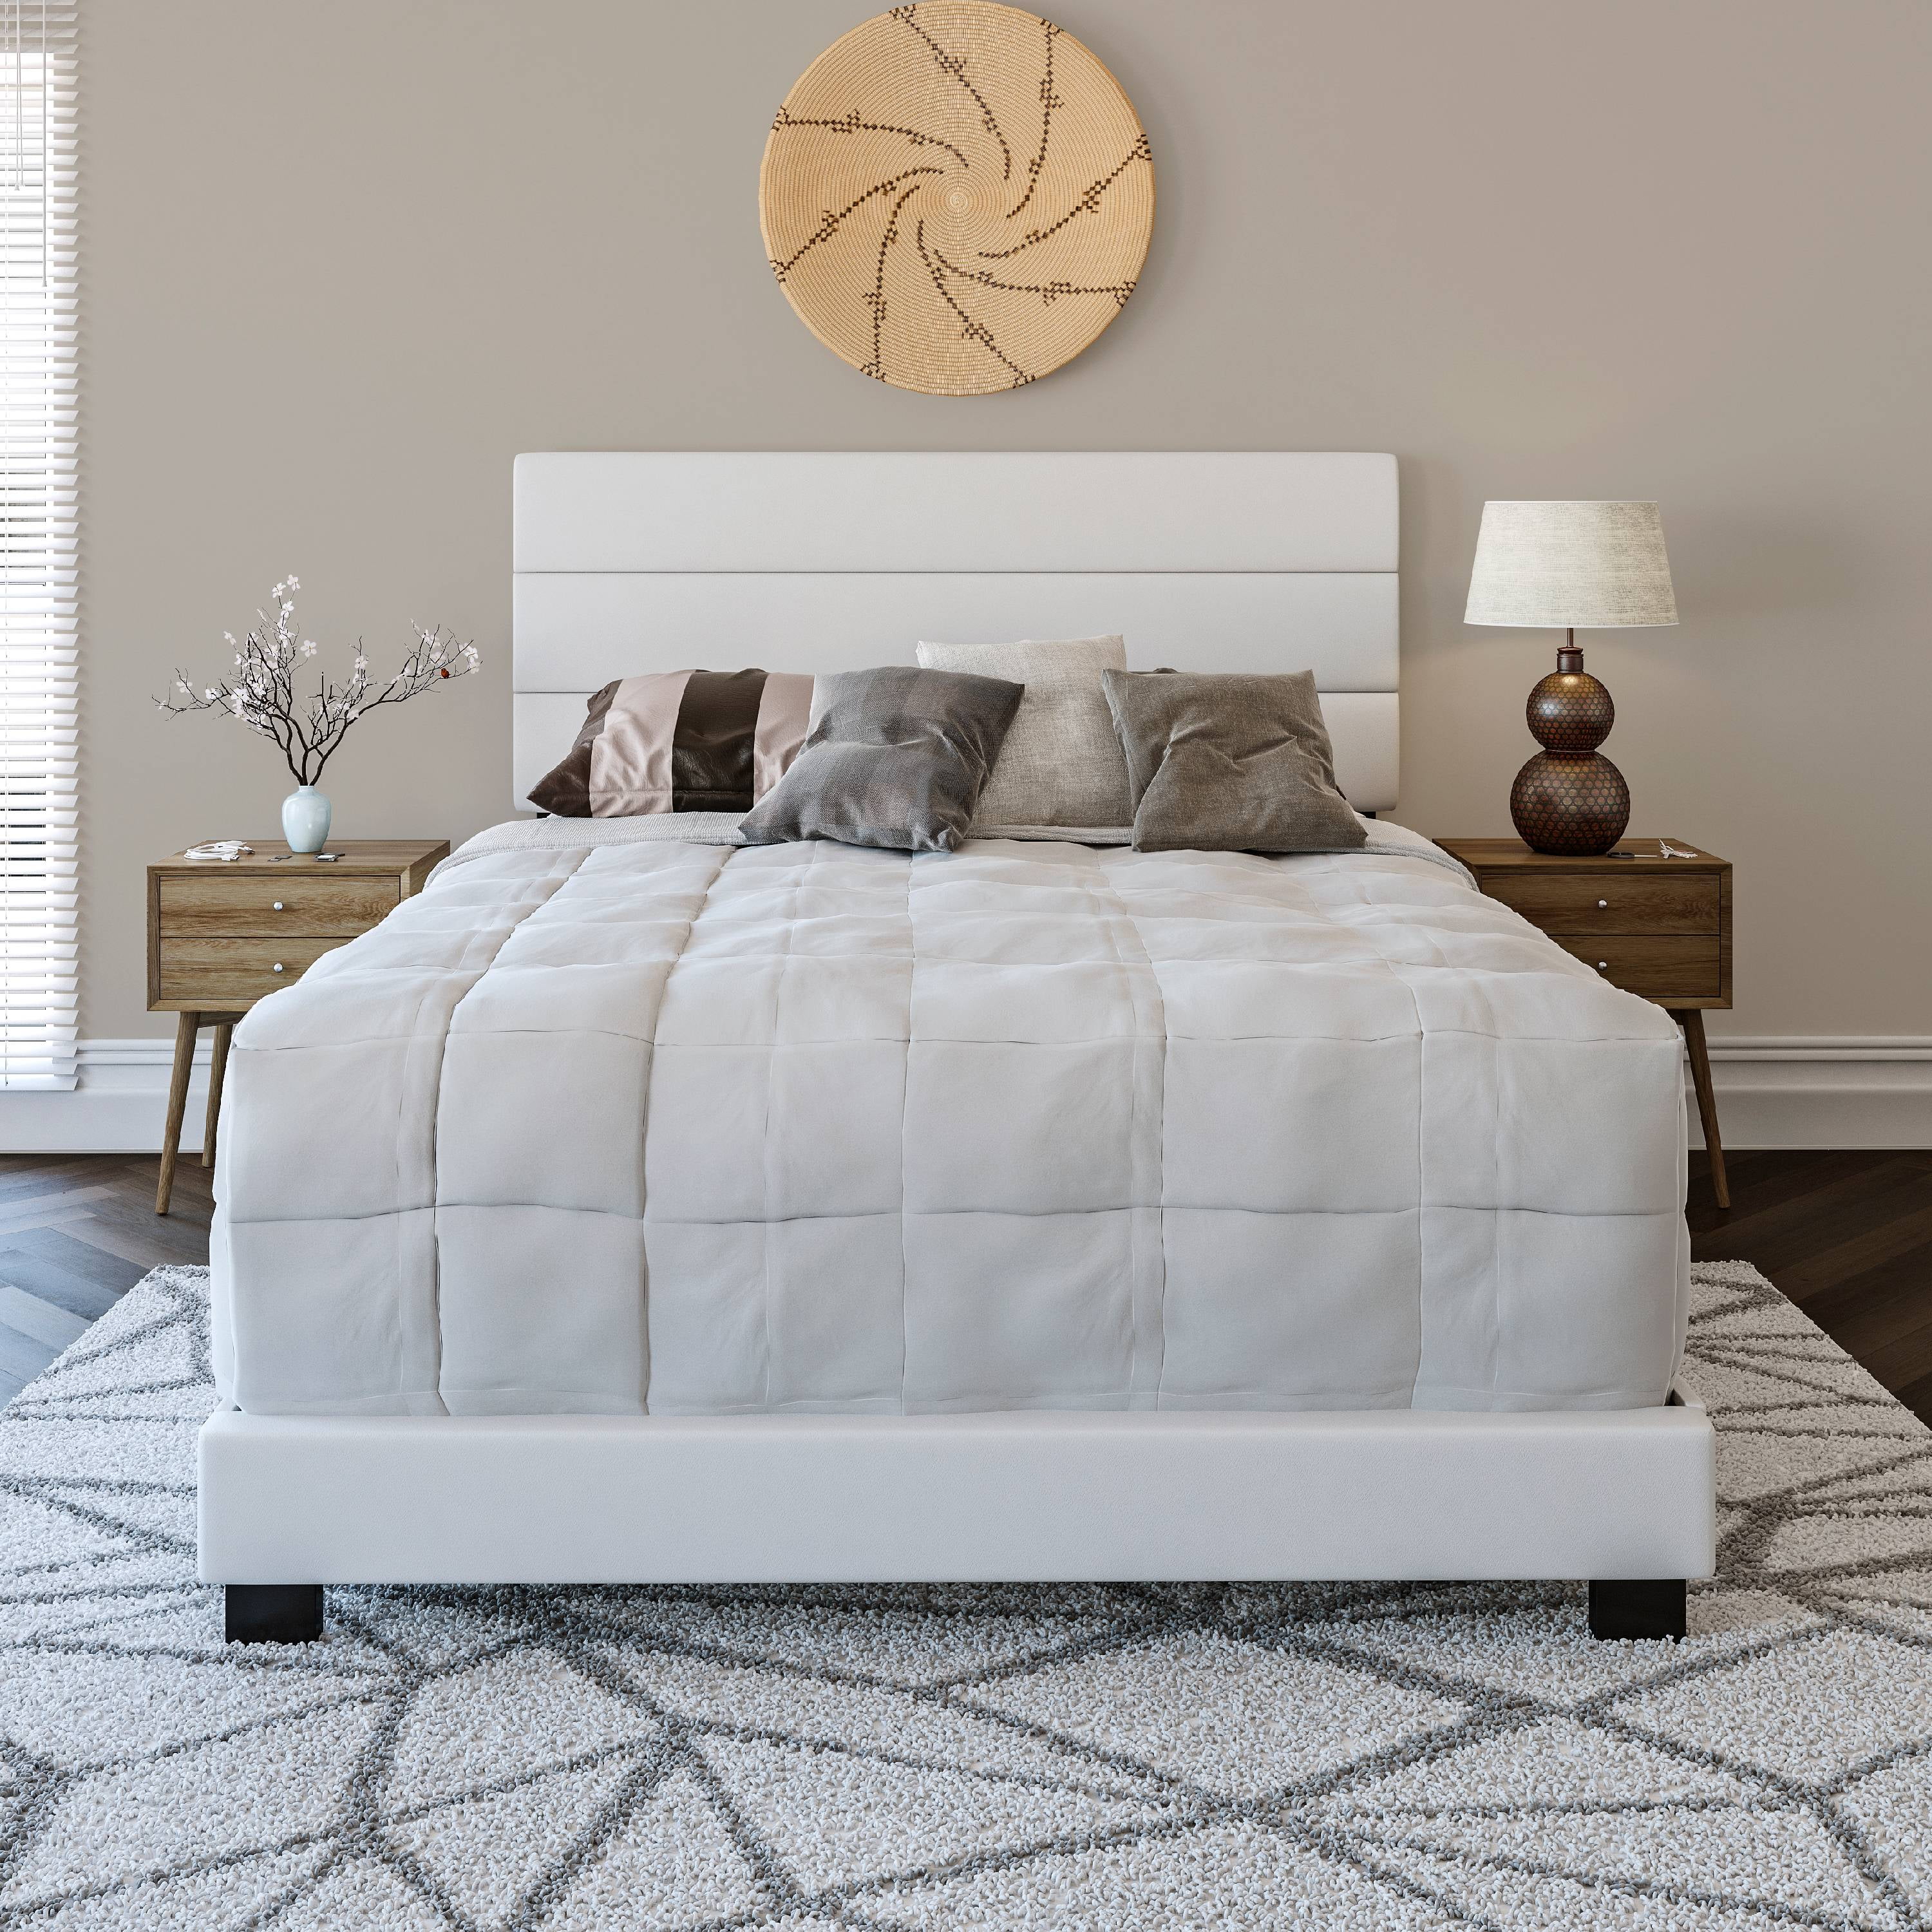 Premier Rapallo Upholstered Faux, White Leather Headboard King Bed